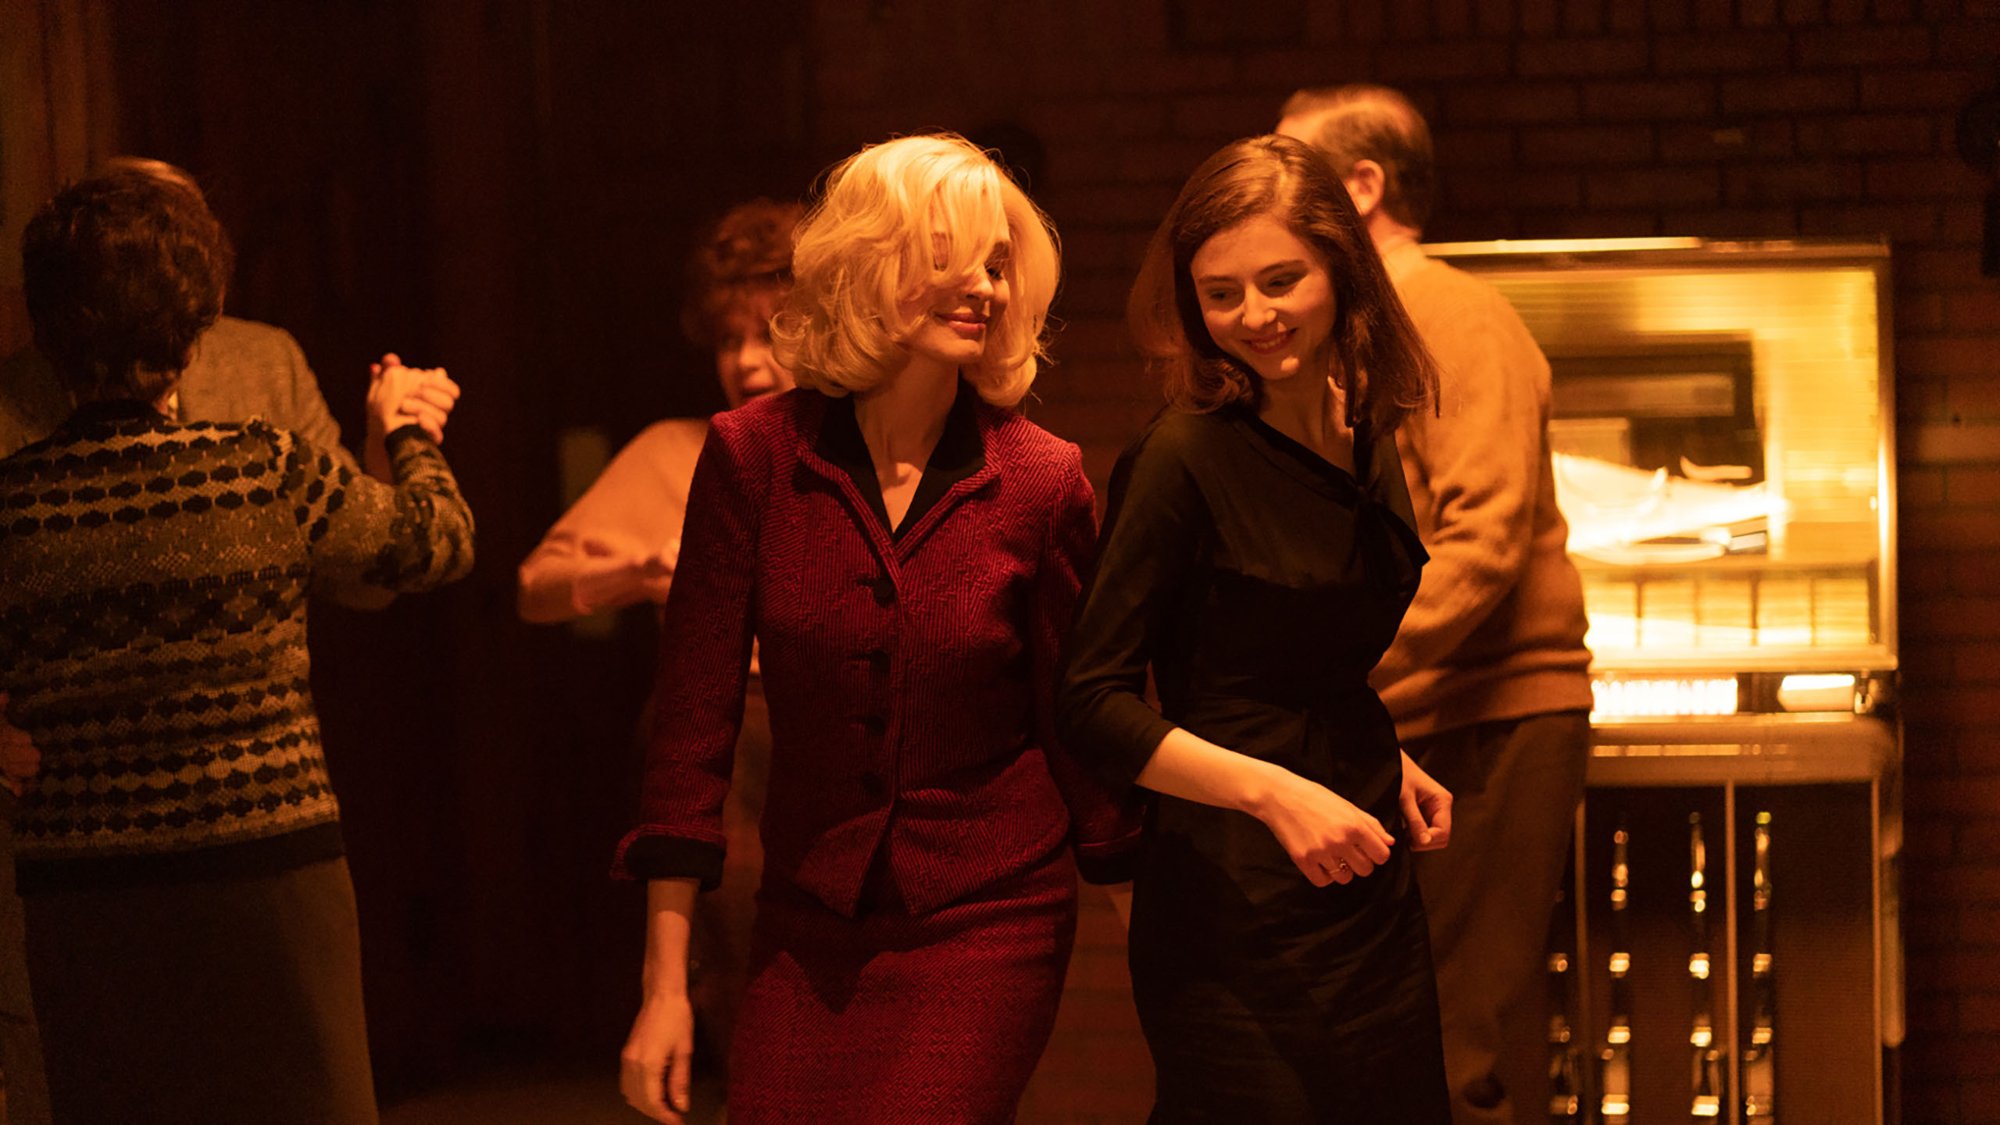 'Eileen' Anne Hathaway as Rebecca and Thomasin McKenzie as Eileen dancing next to each other, smiling.